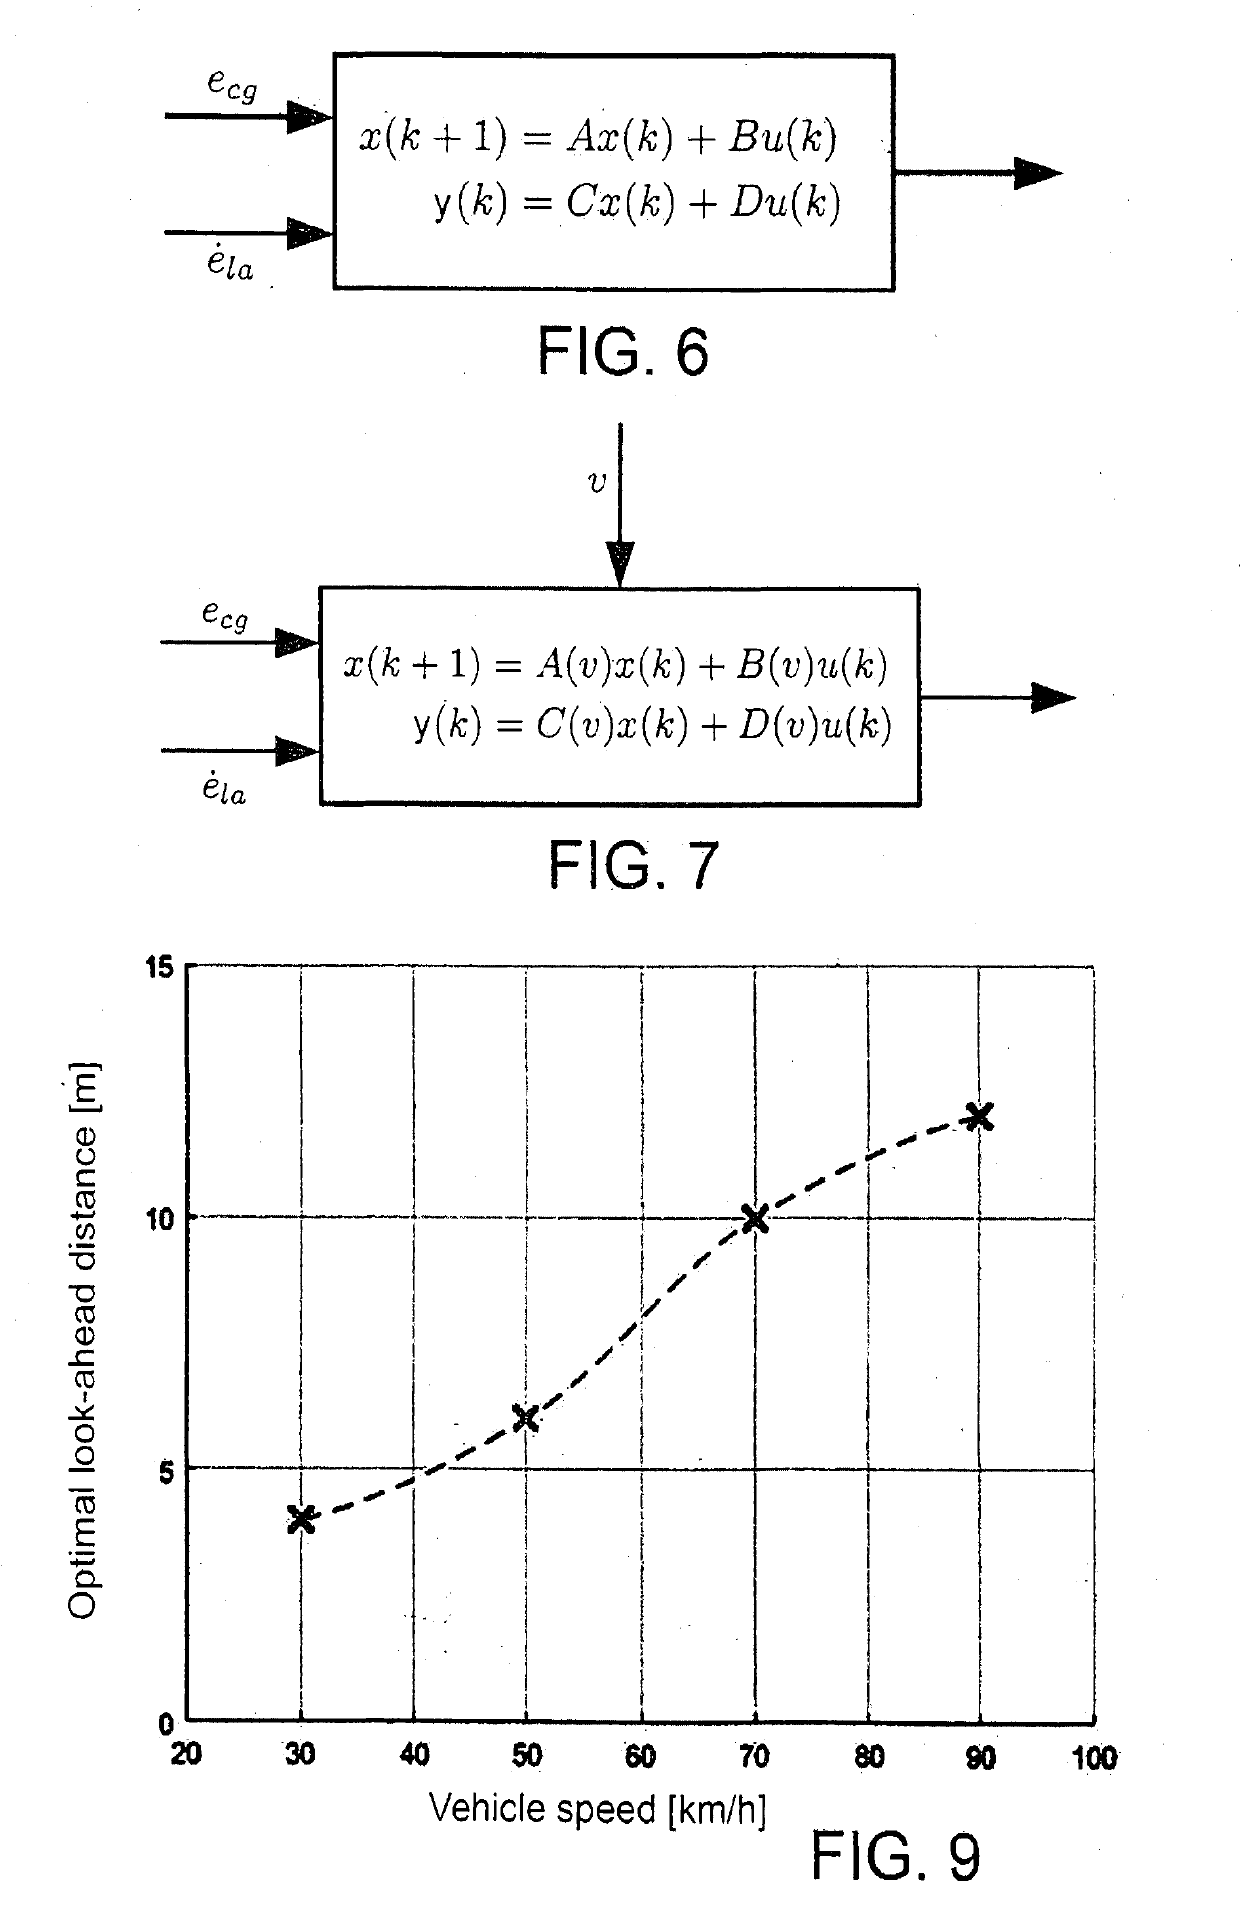 Adaptive control method and system in a terrestrial vehicle for tracking a route, particularly in an autonomous driving scenario